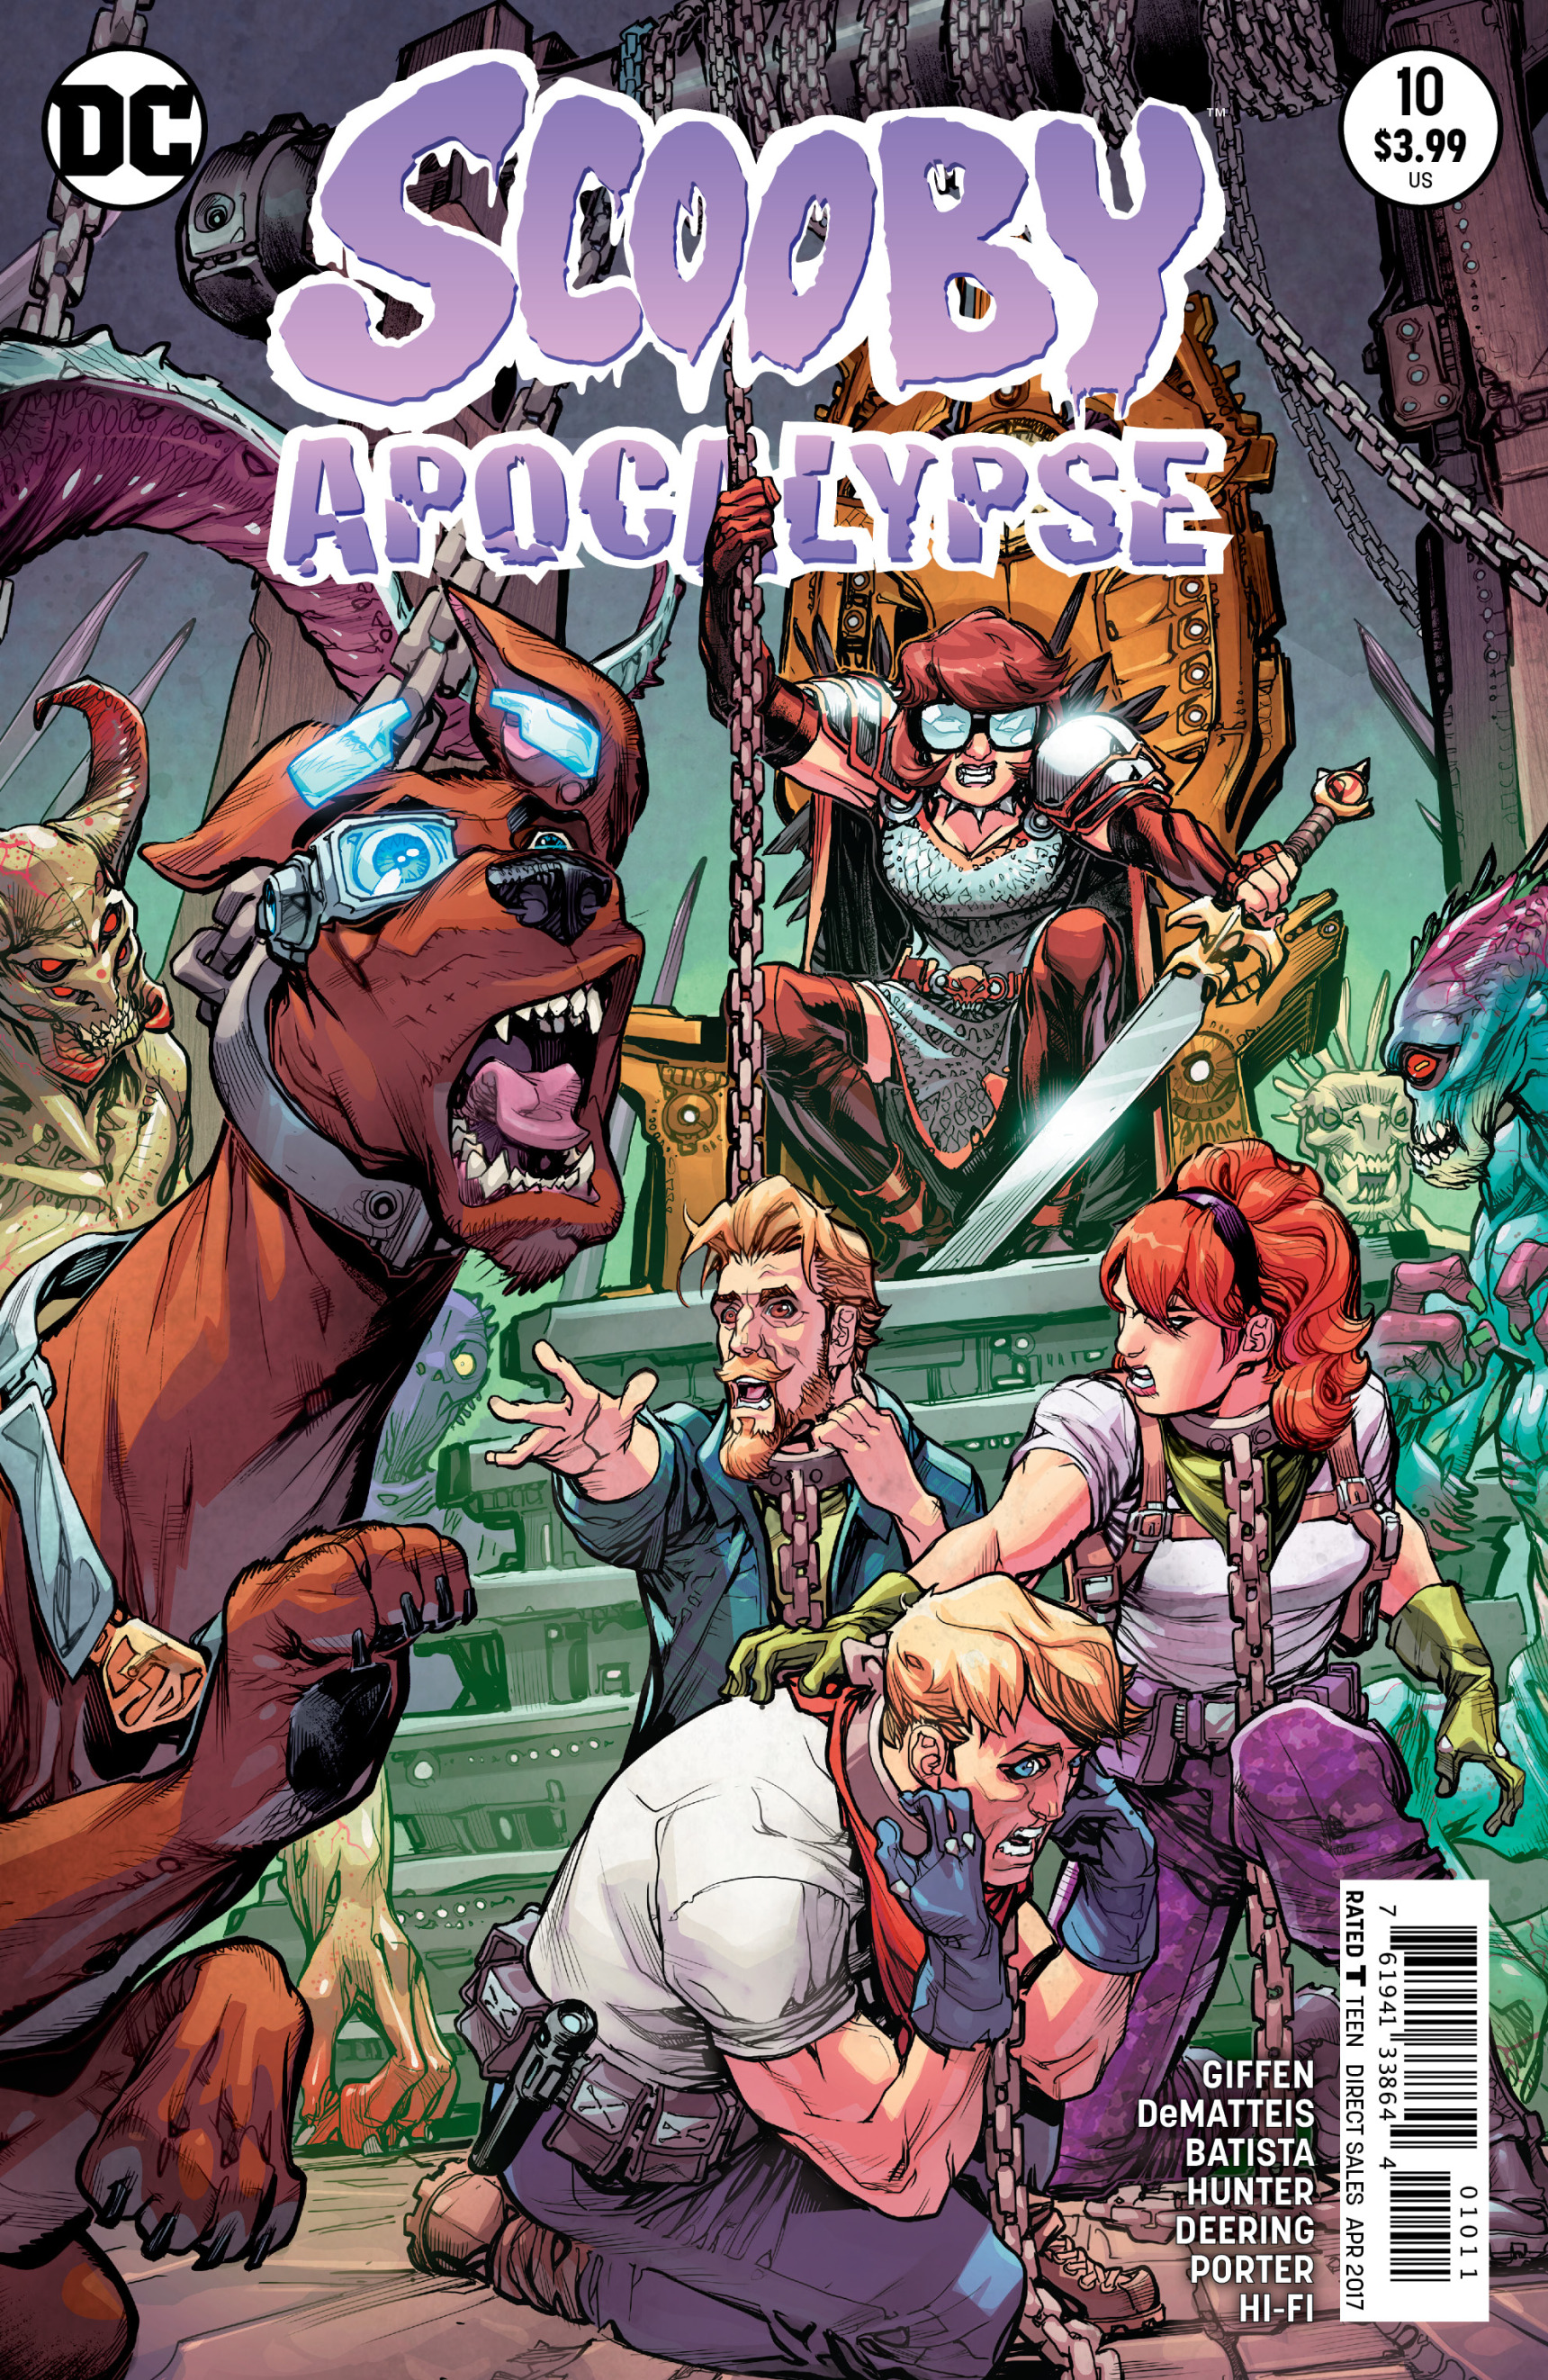 https://vignette.wikia.nocookie.net/scoobydoo/images/4/4e/SA_10_cover.png/revision/latest?cb=20170218103232